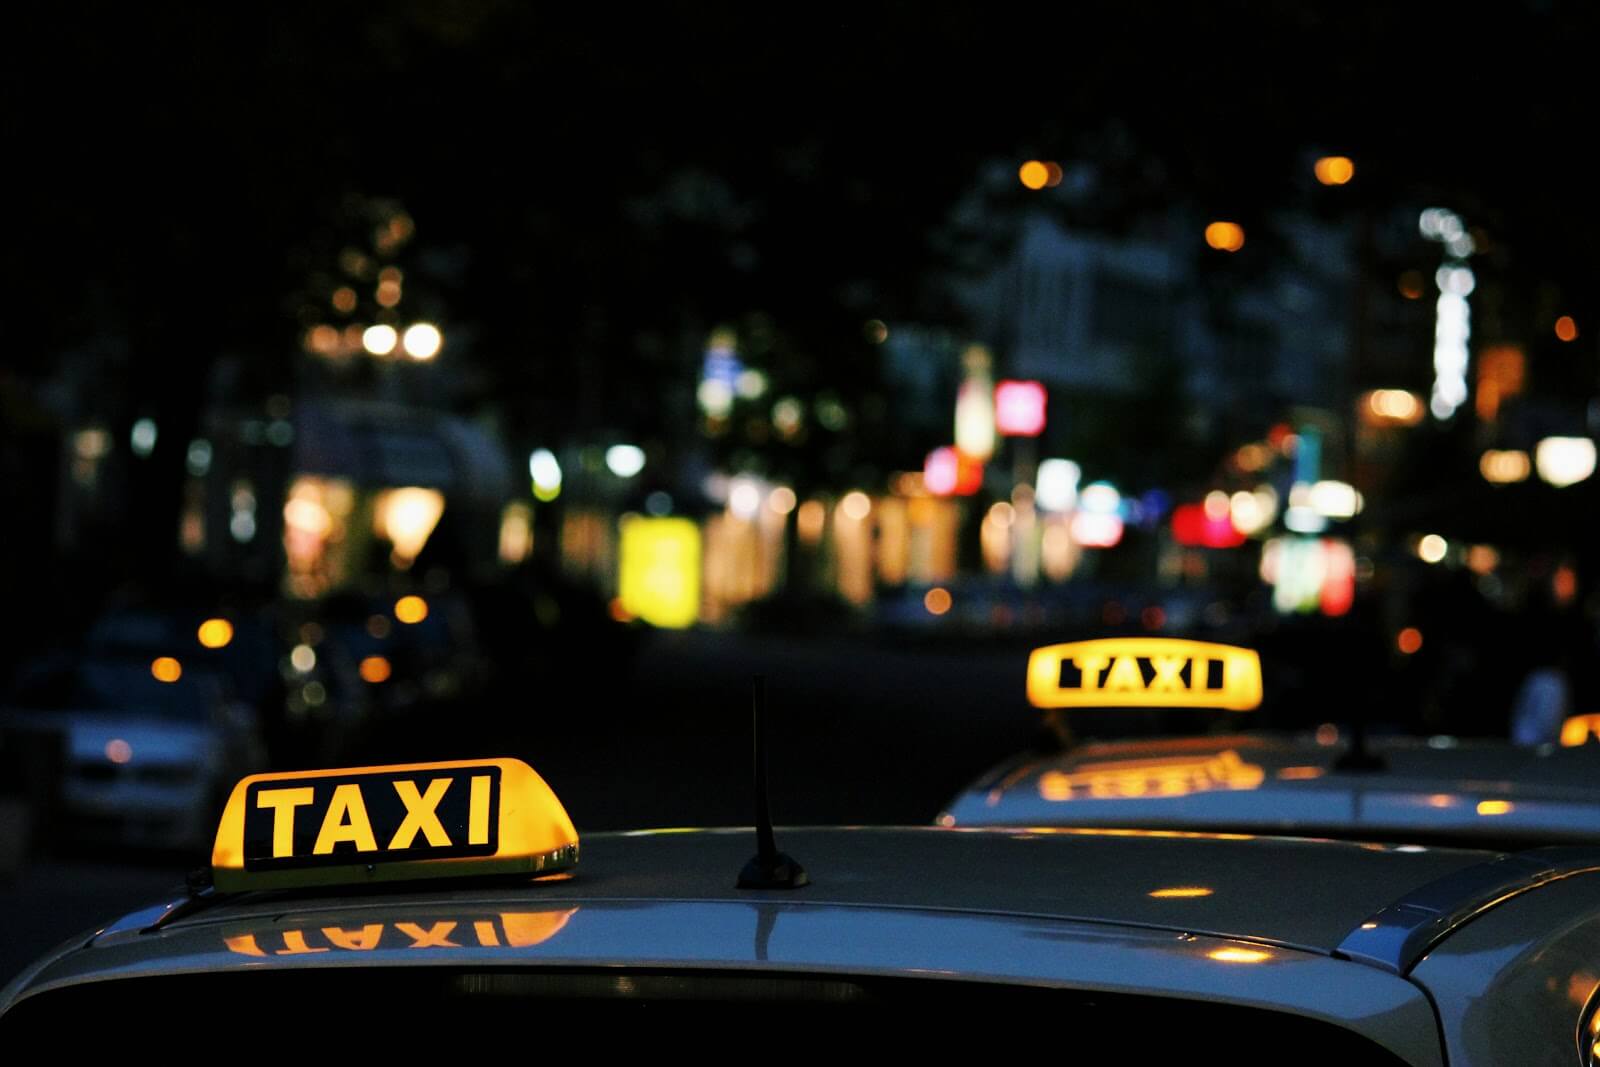 Easy Taxi: Lit-up taxi signs on cabs